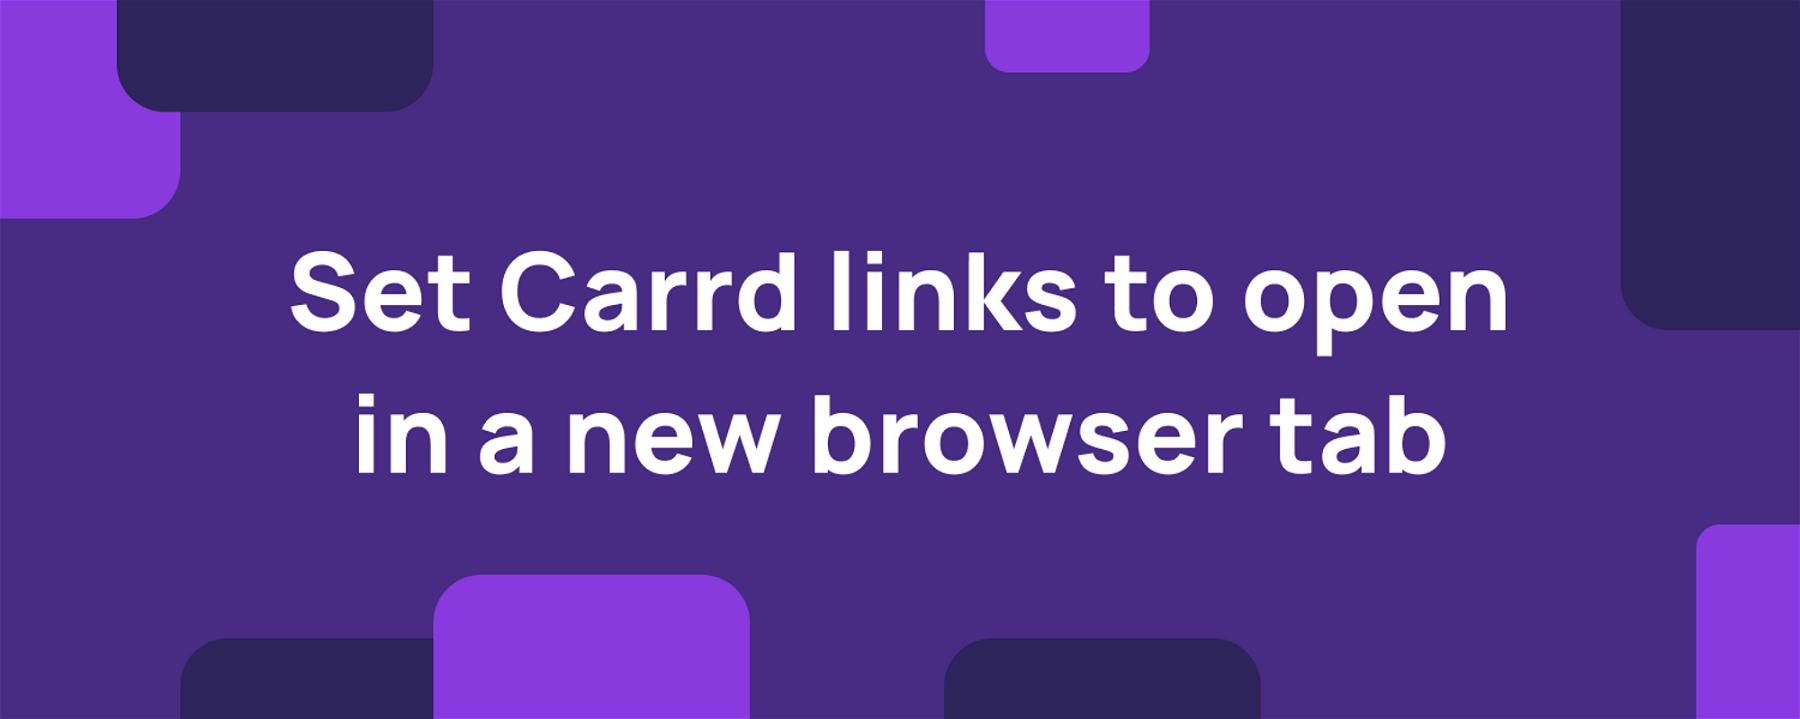 Set Carrd links to open in a new browser tab